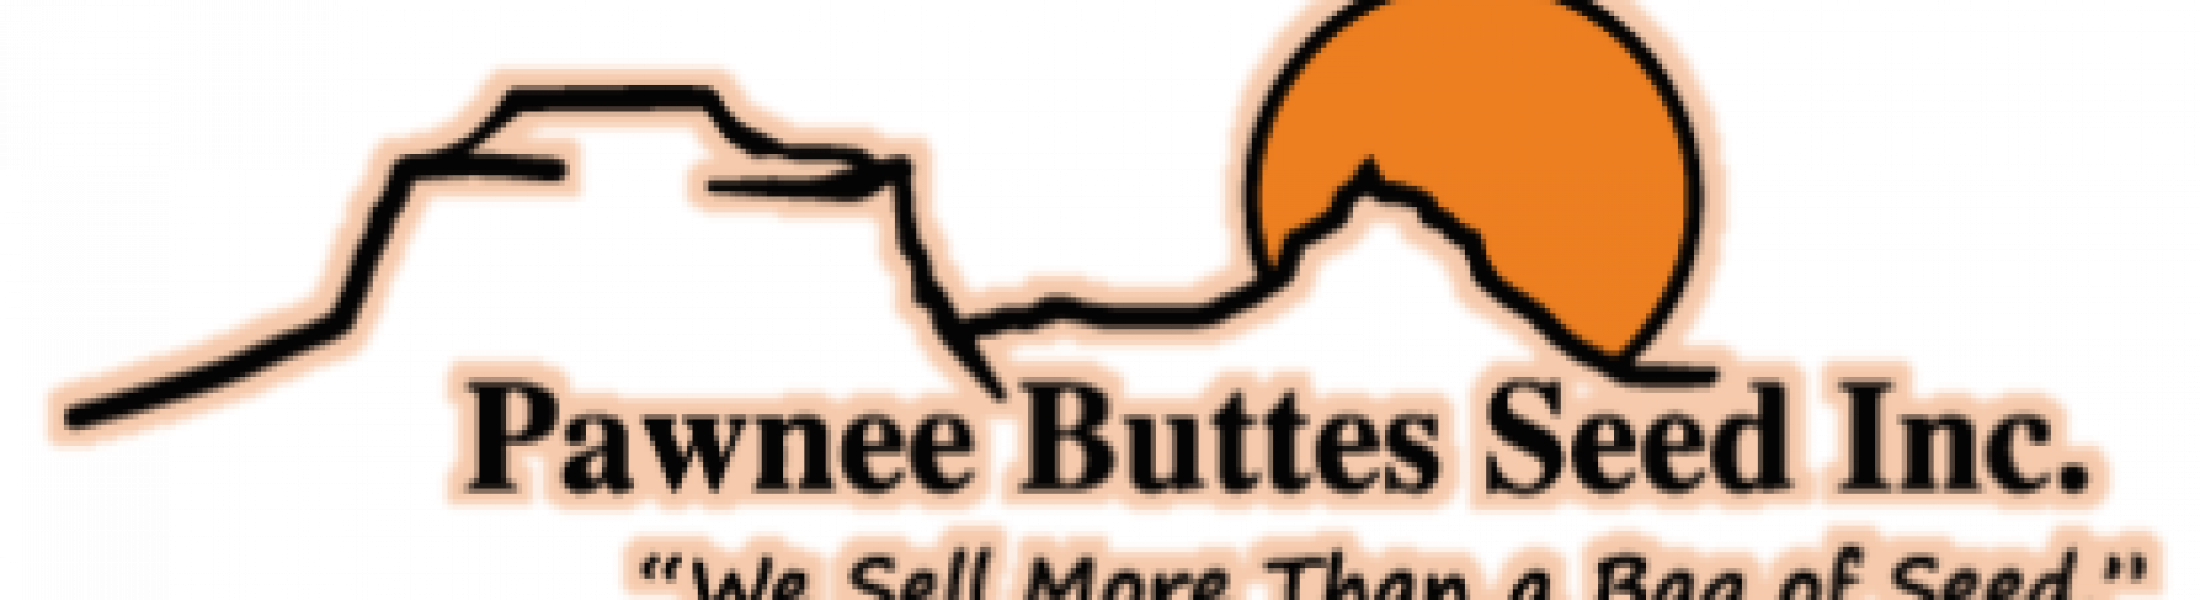 Pawnee buttes seed